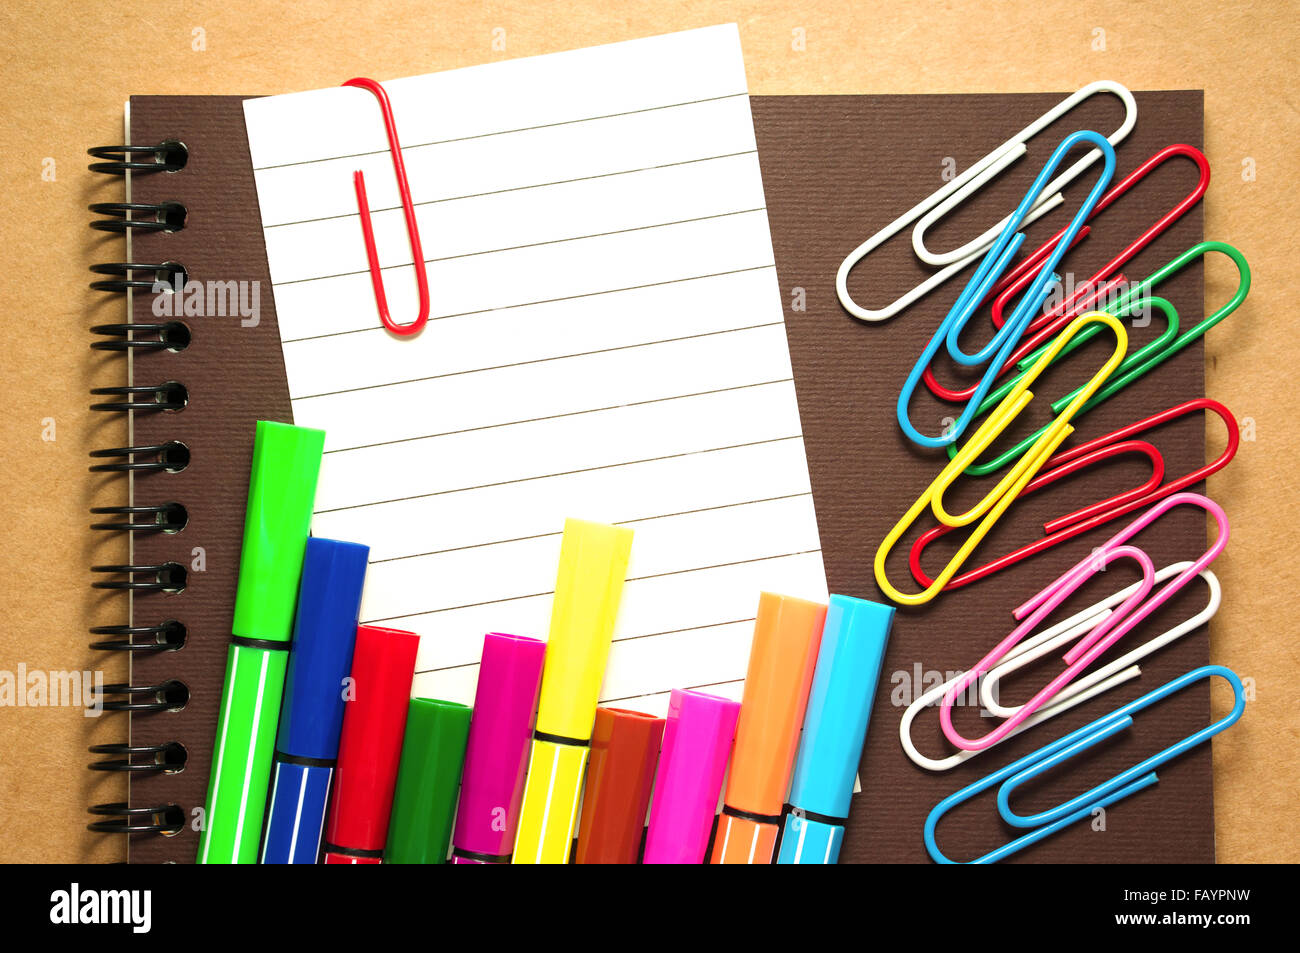 Note paper clip on notebook with colorful marker pen and paperclips on  brown cardboard background Stock Photo - Alamy